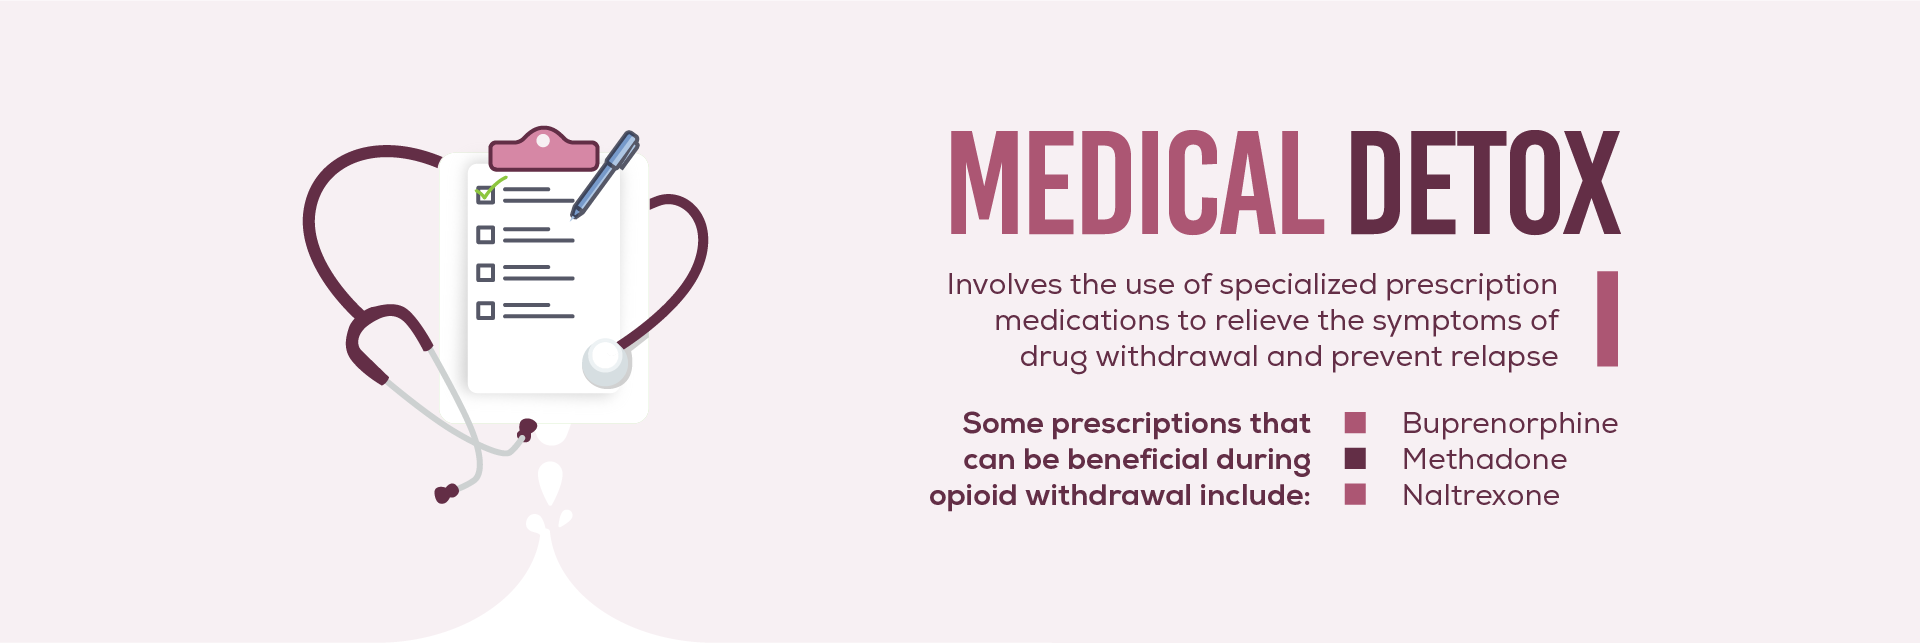 Medical detox involves the use of specialized prescription medications to relieve the symptoms of drug withdrawal and prevent relapse. Some prescriptions that can be beneficial during opiod withdrawal include buprenorphine, methadone and naltrexone